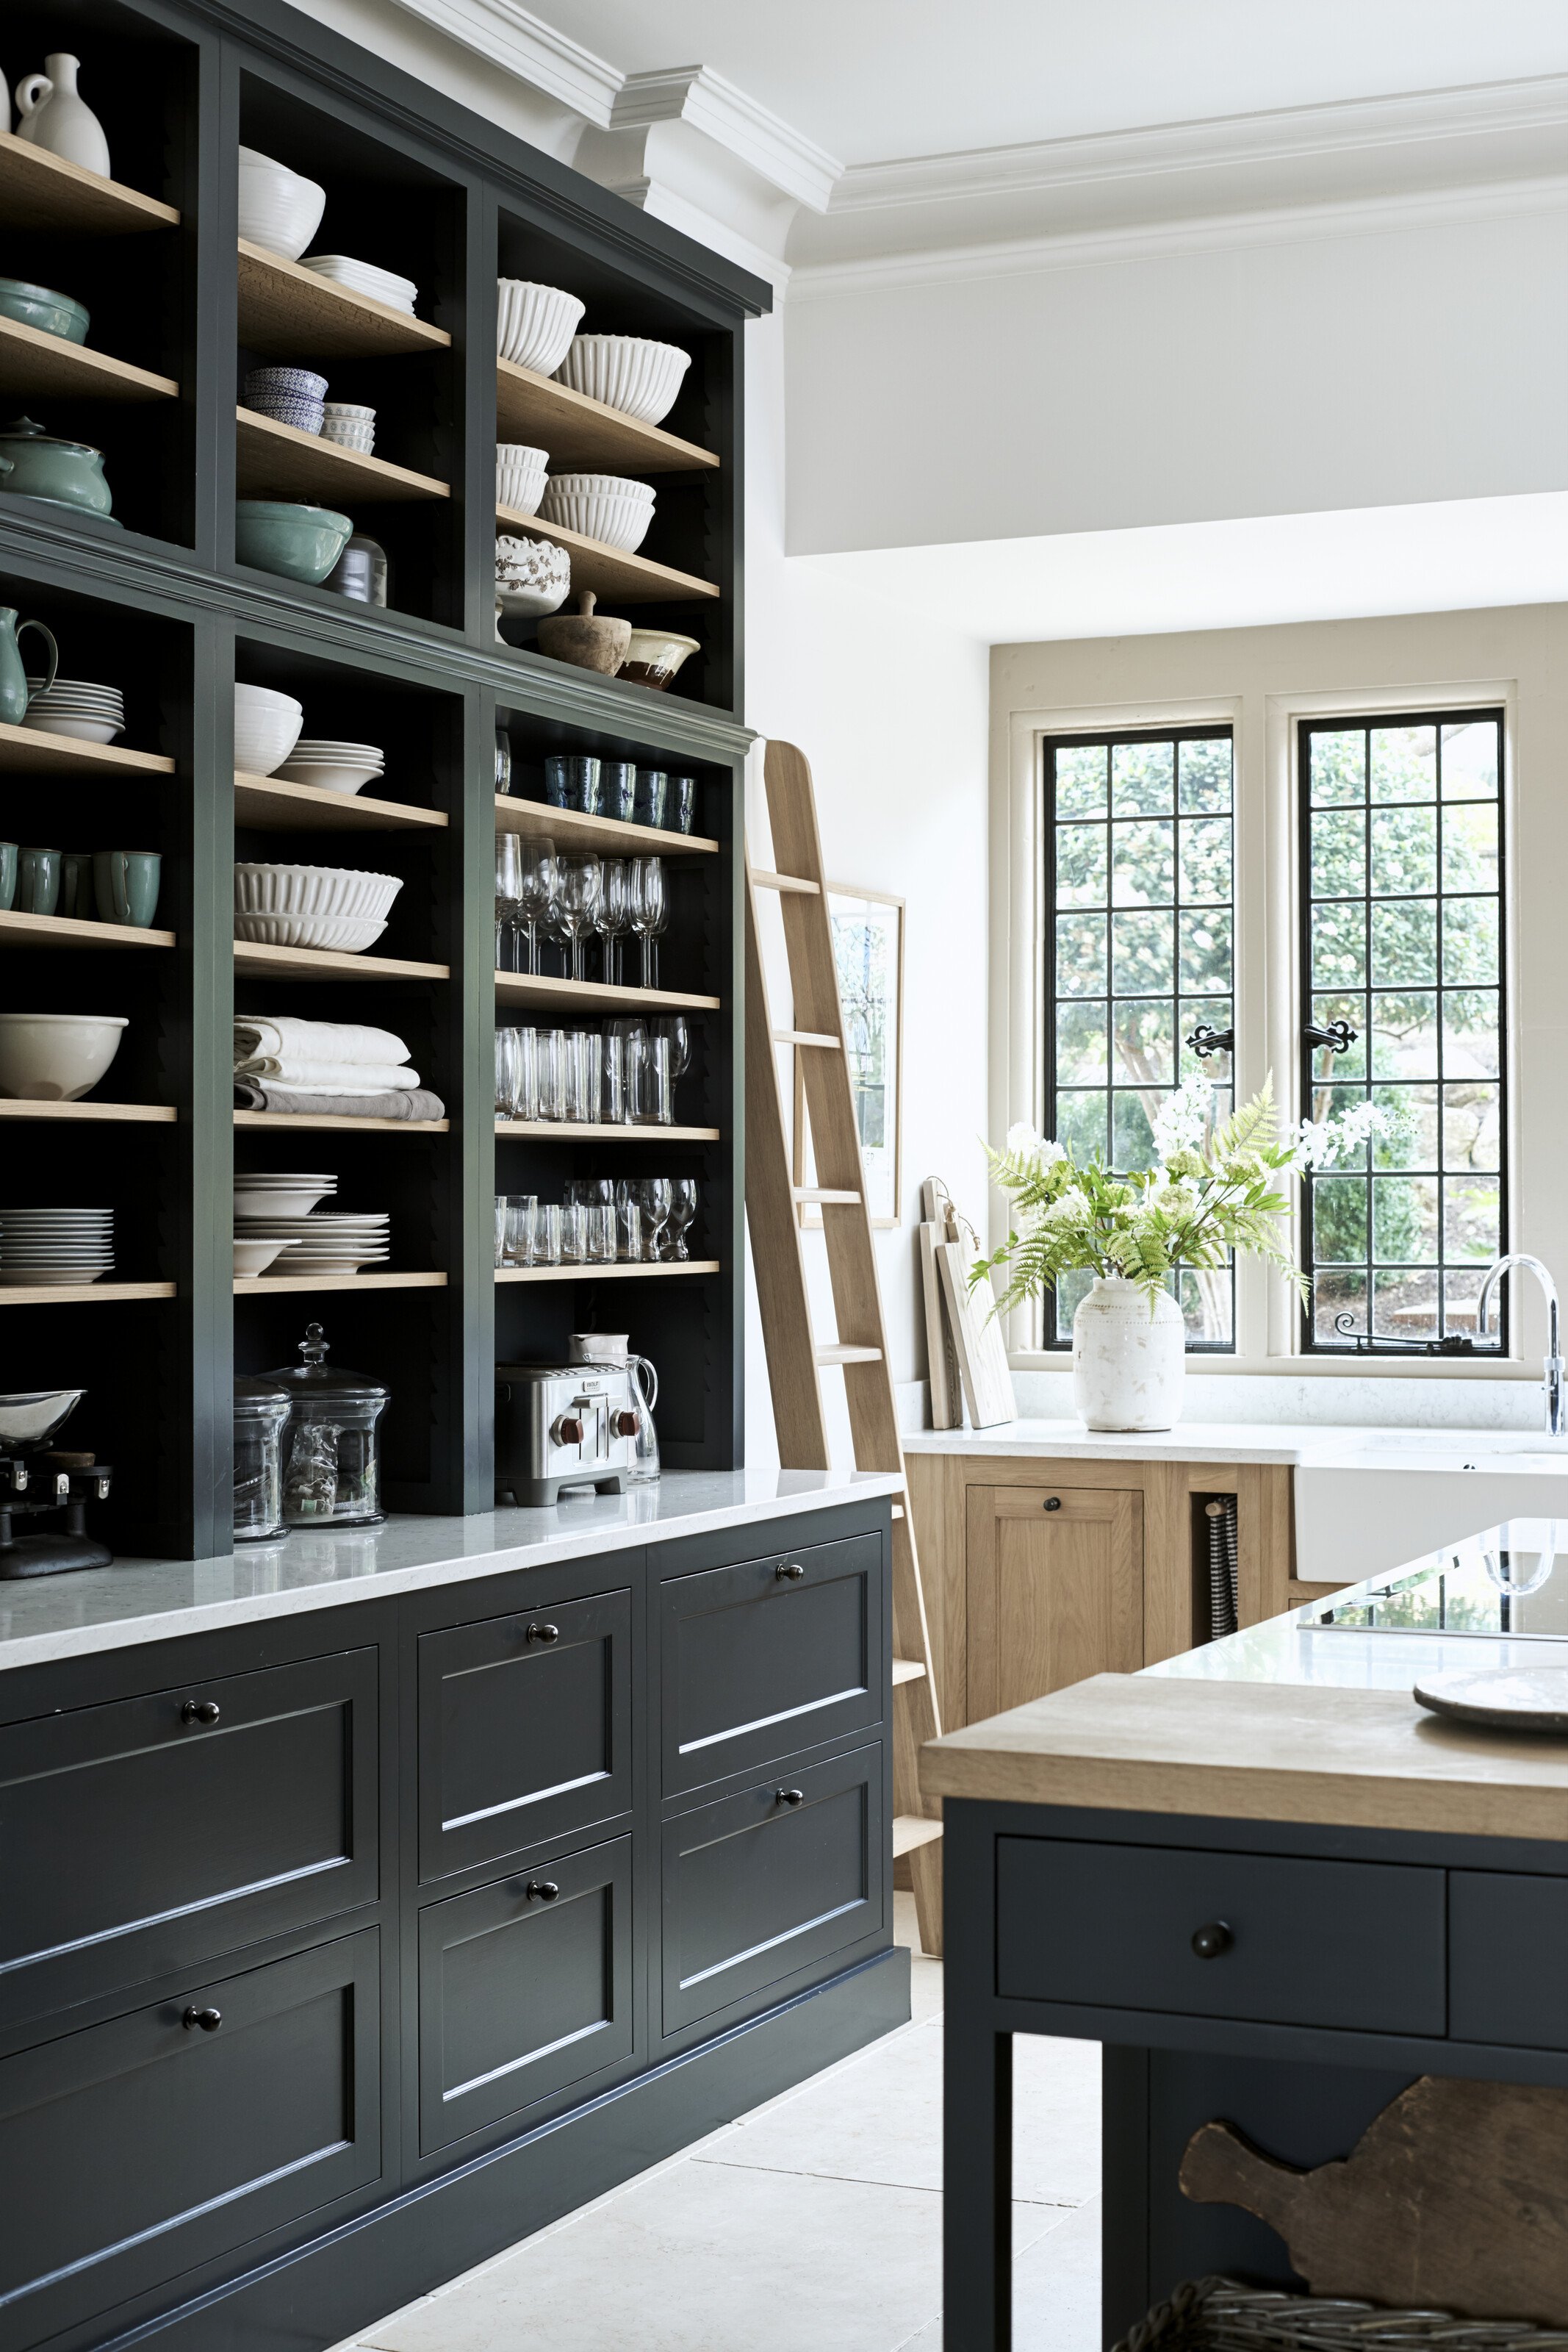 Large-Marley_Henley Painted Kitchen_03.jpg